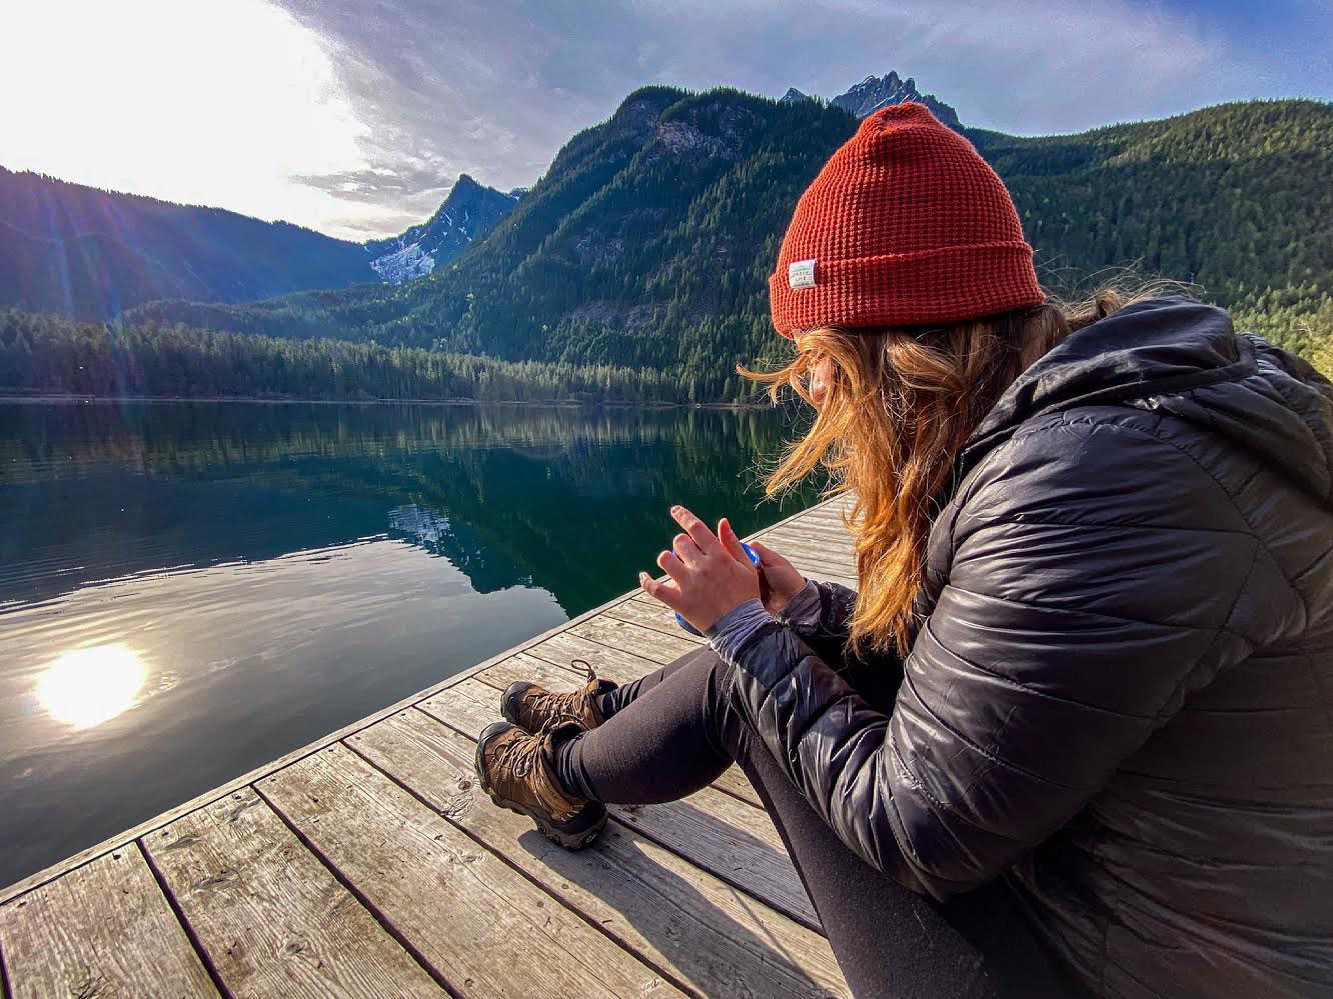 Woman sitting on the dock overlooking a lake and mountains in the distance.